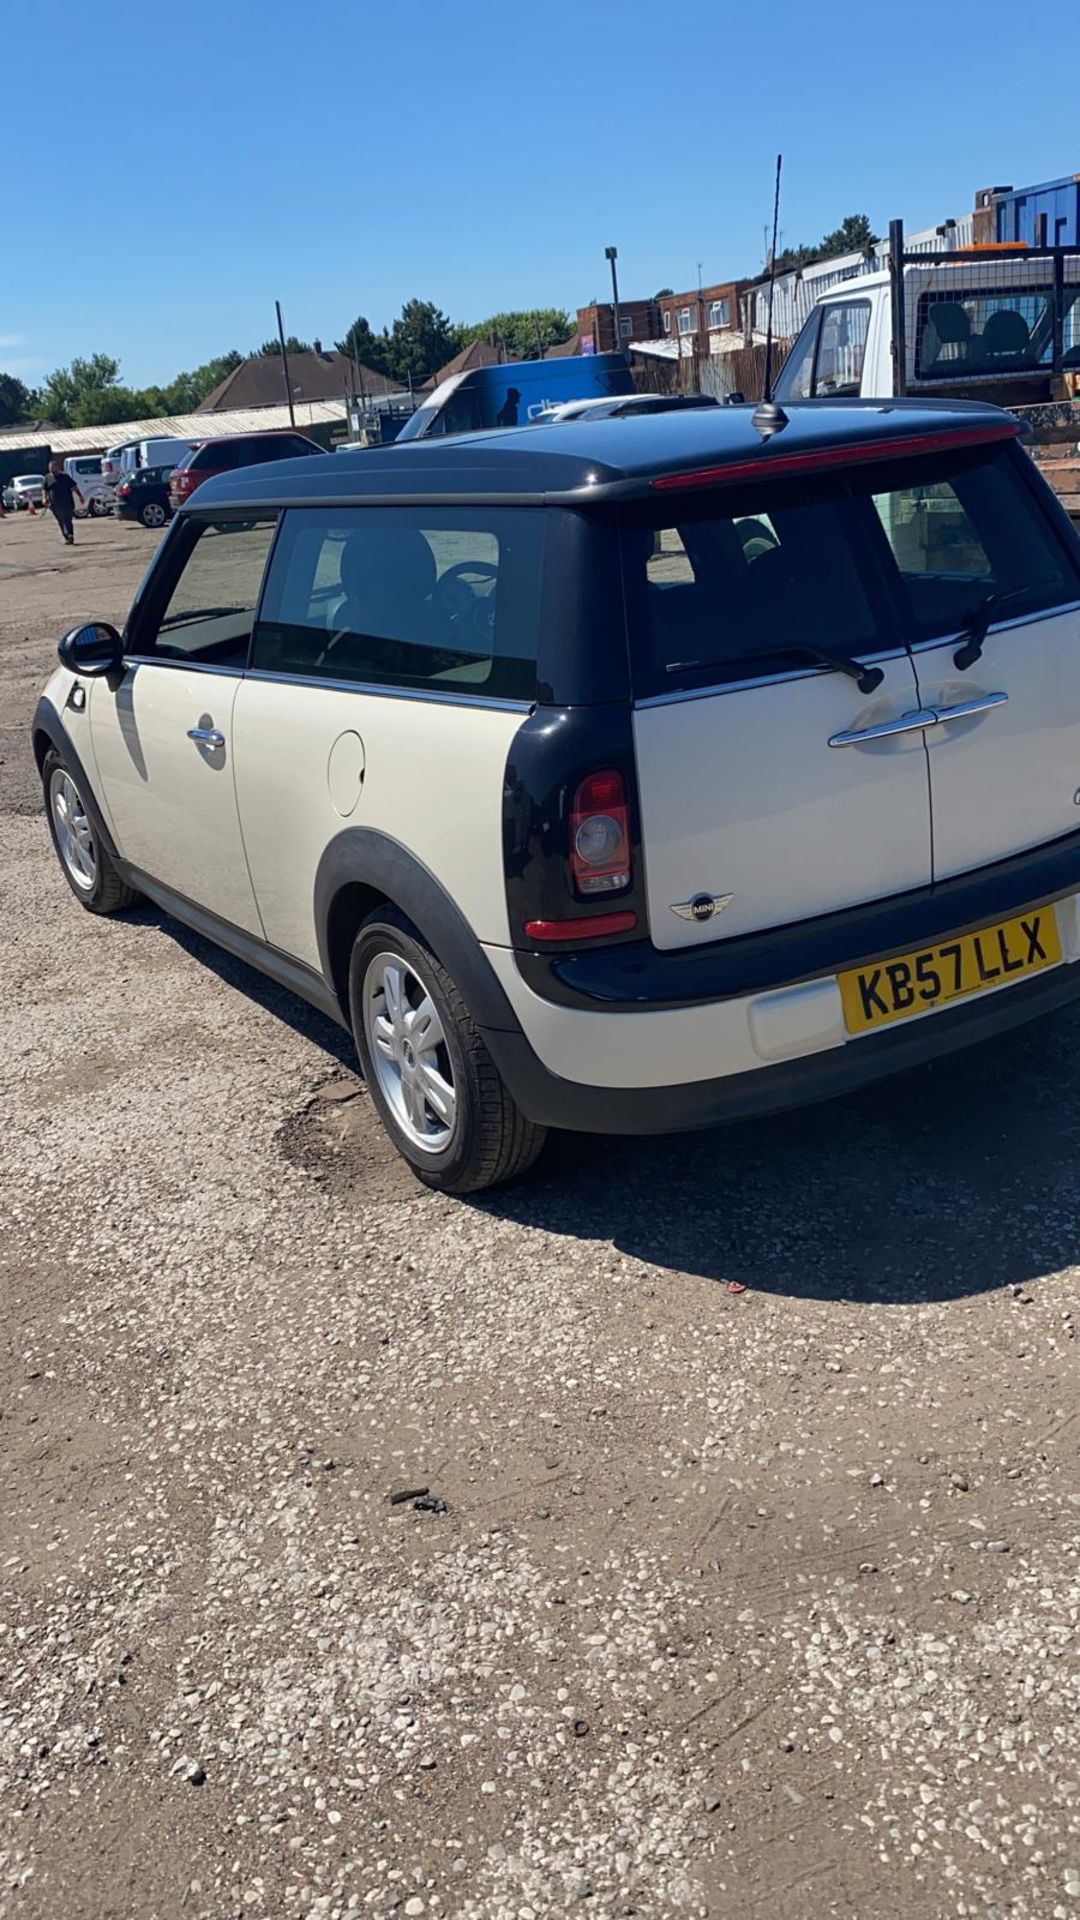 2007/57 REG MINI COOPER CLUBMAN 1.6 PETROL WHITE, SHOWING 3 FORMER KEEPERS *NO VAT* - Image 5 of 11